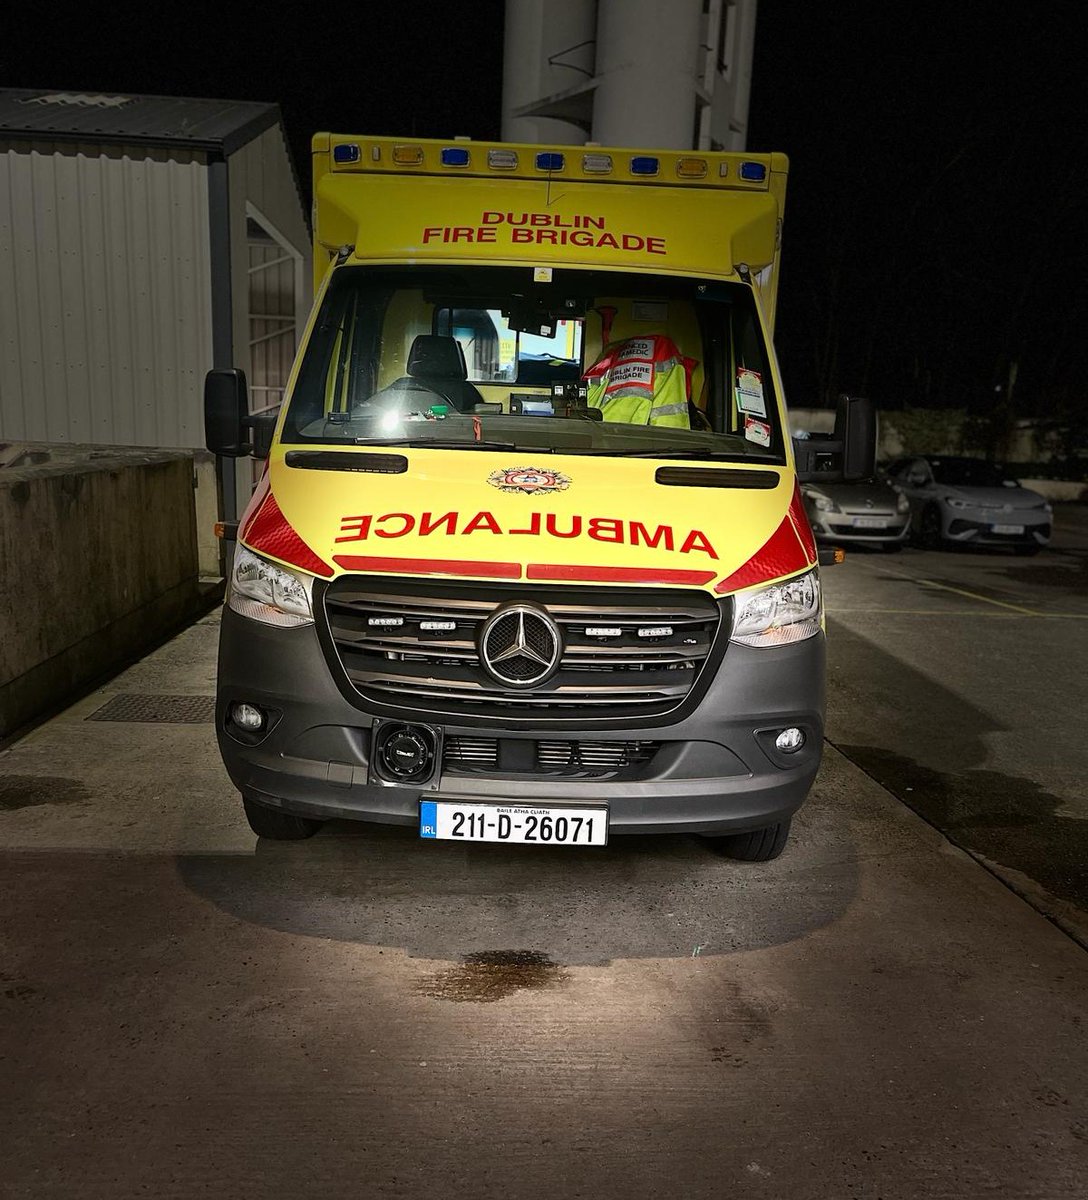 Our Donnybrook emergency ambulance during a night duty.

Our ambulances are crewed by both paramedics and advanced paramedics and we are marking 125 years of service to the city of Dublin.

#Ambulance125